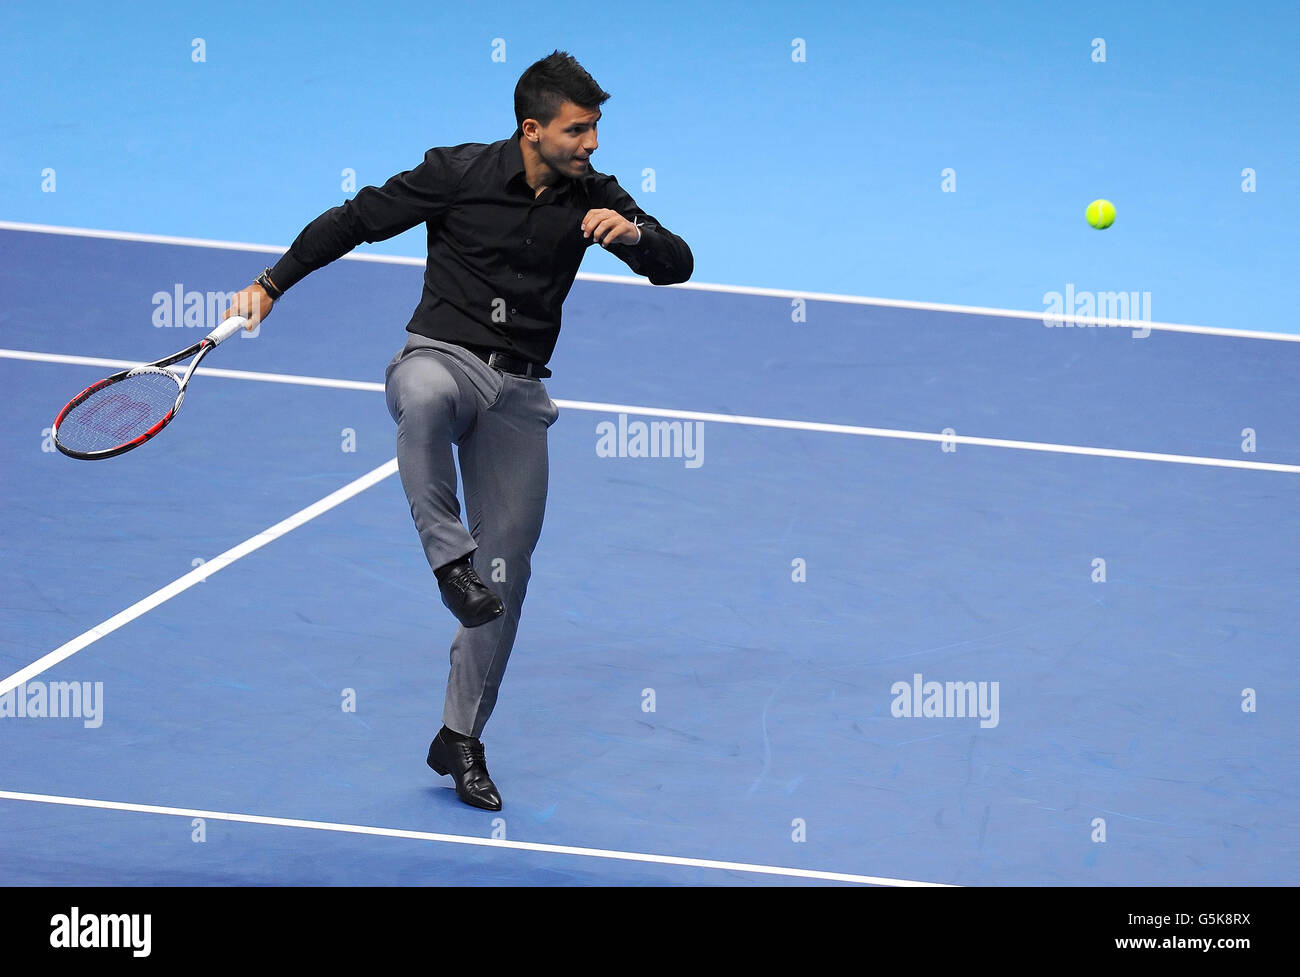 Manchester City striker Sergio Aguero kicks a tennis ball as he plays tennis with Argentina's Juan Martin del Potro (not pictured) following del Potro's match against Serbia's Janko Tipsarevic during the Barclays ATP World Tour Finals at the O2 Arena, London. Stock Photo